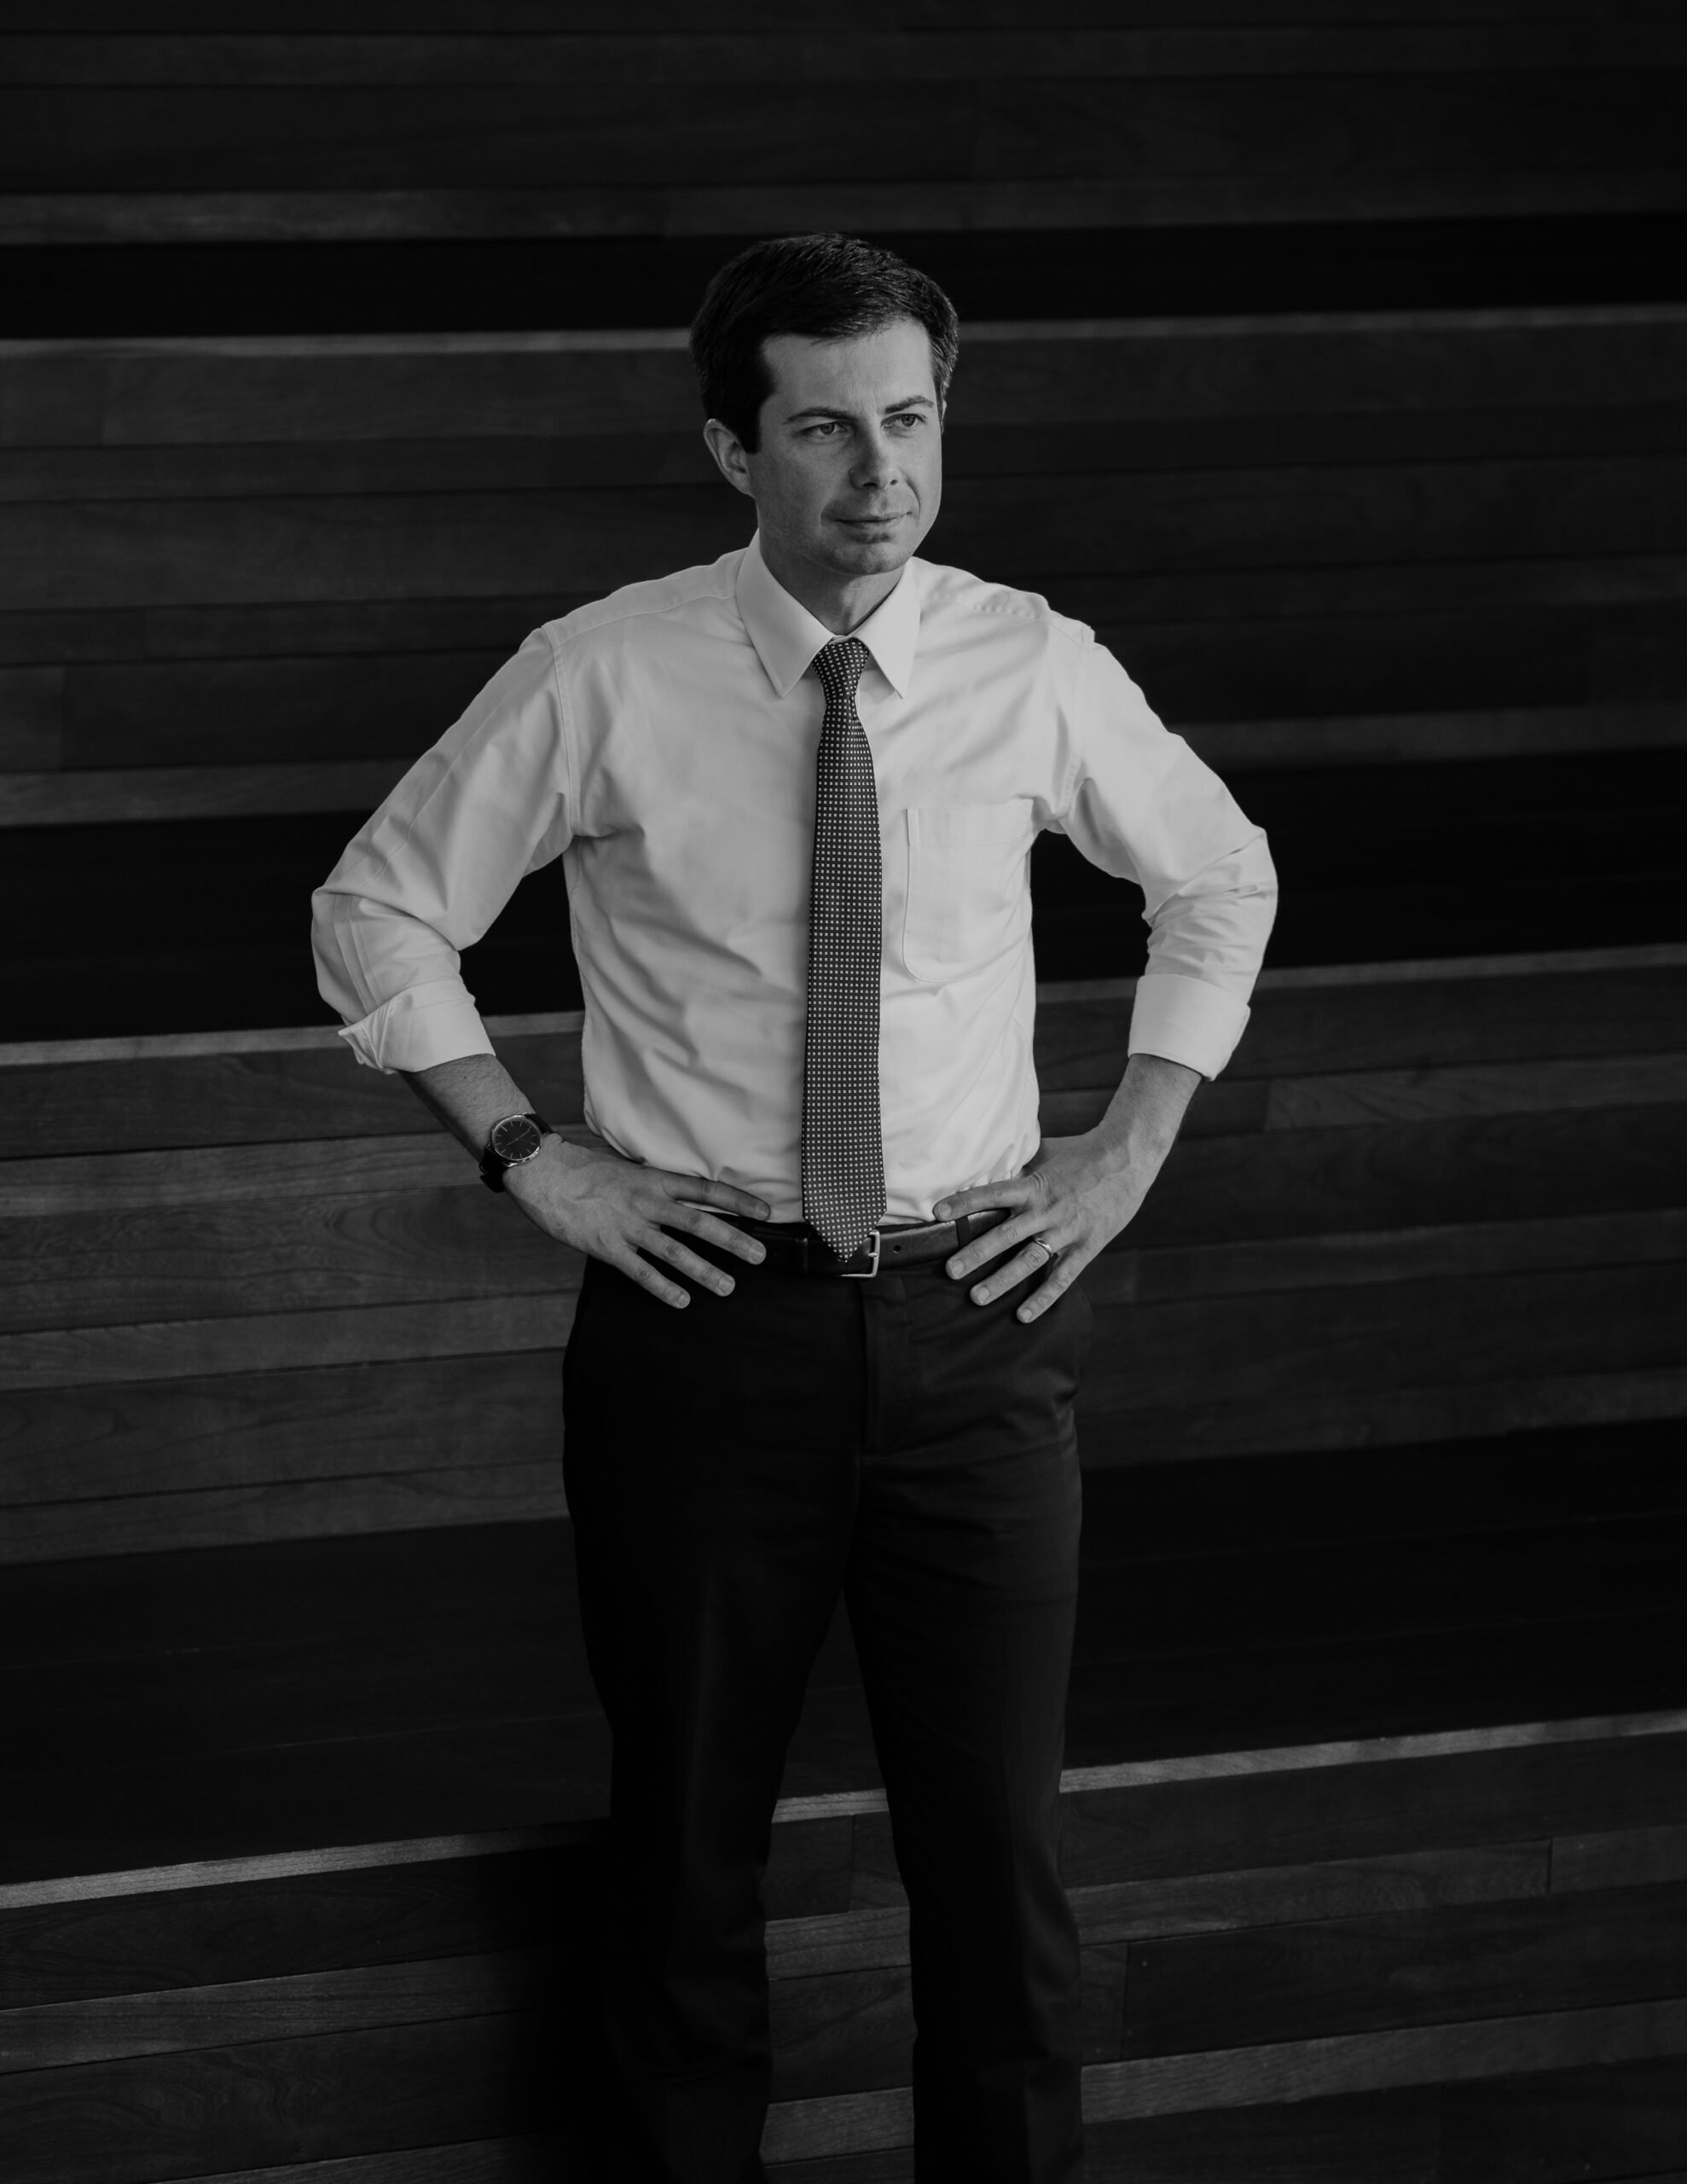 A black and white photograph of Mayor Pete Buttigieg standing with hands on hips looking out of frame